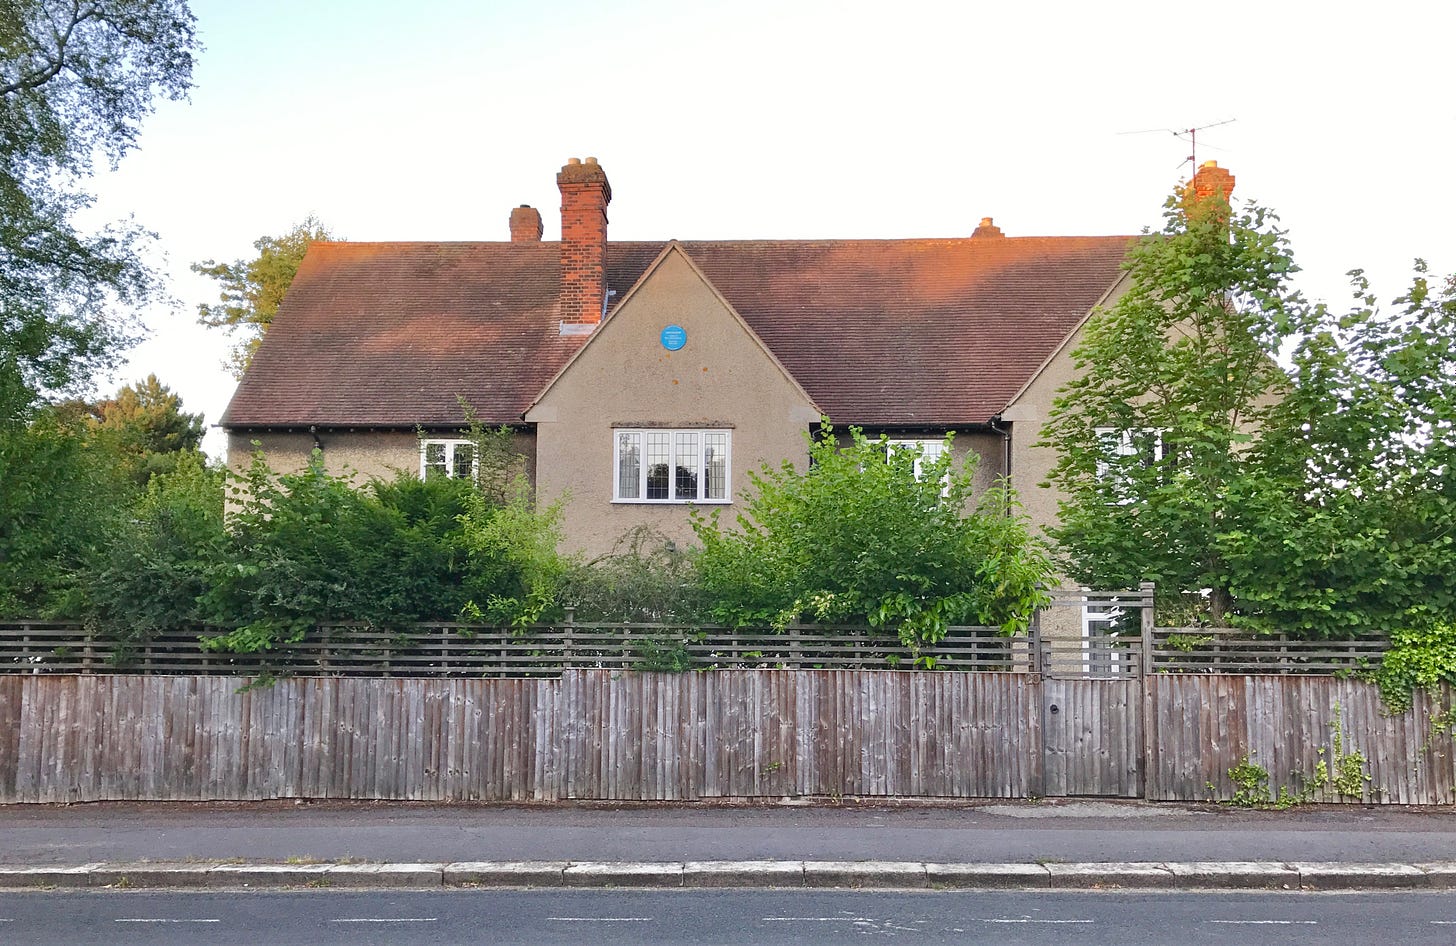 JRR Tolkien’s family home with his blue plaque on Northmoor Road, Oxford, UK. 